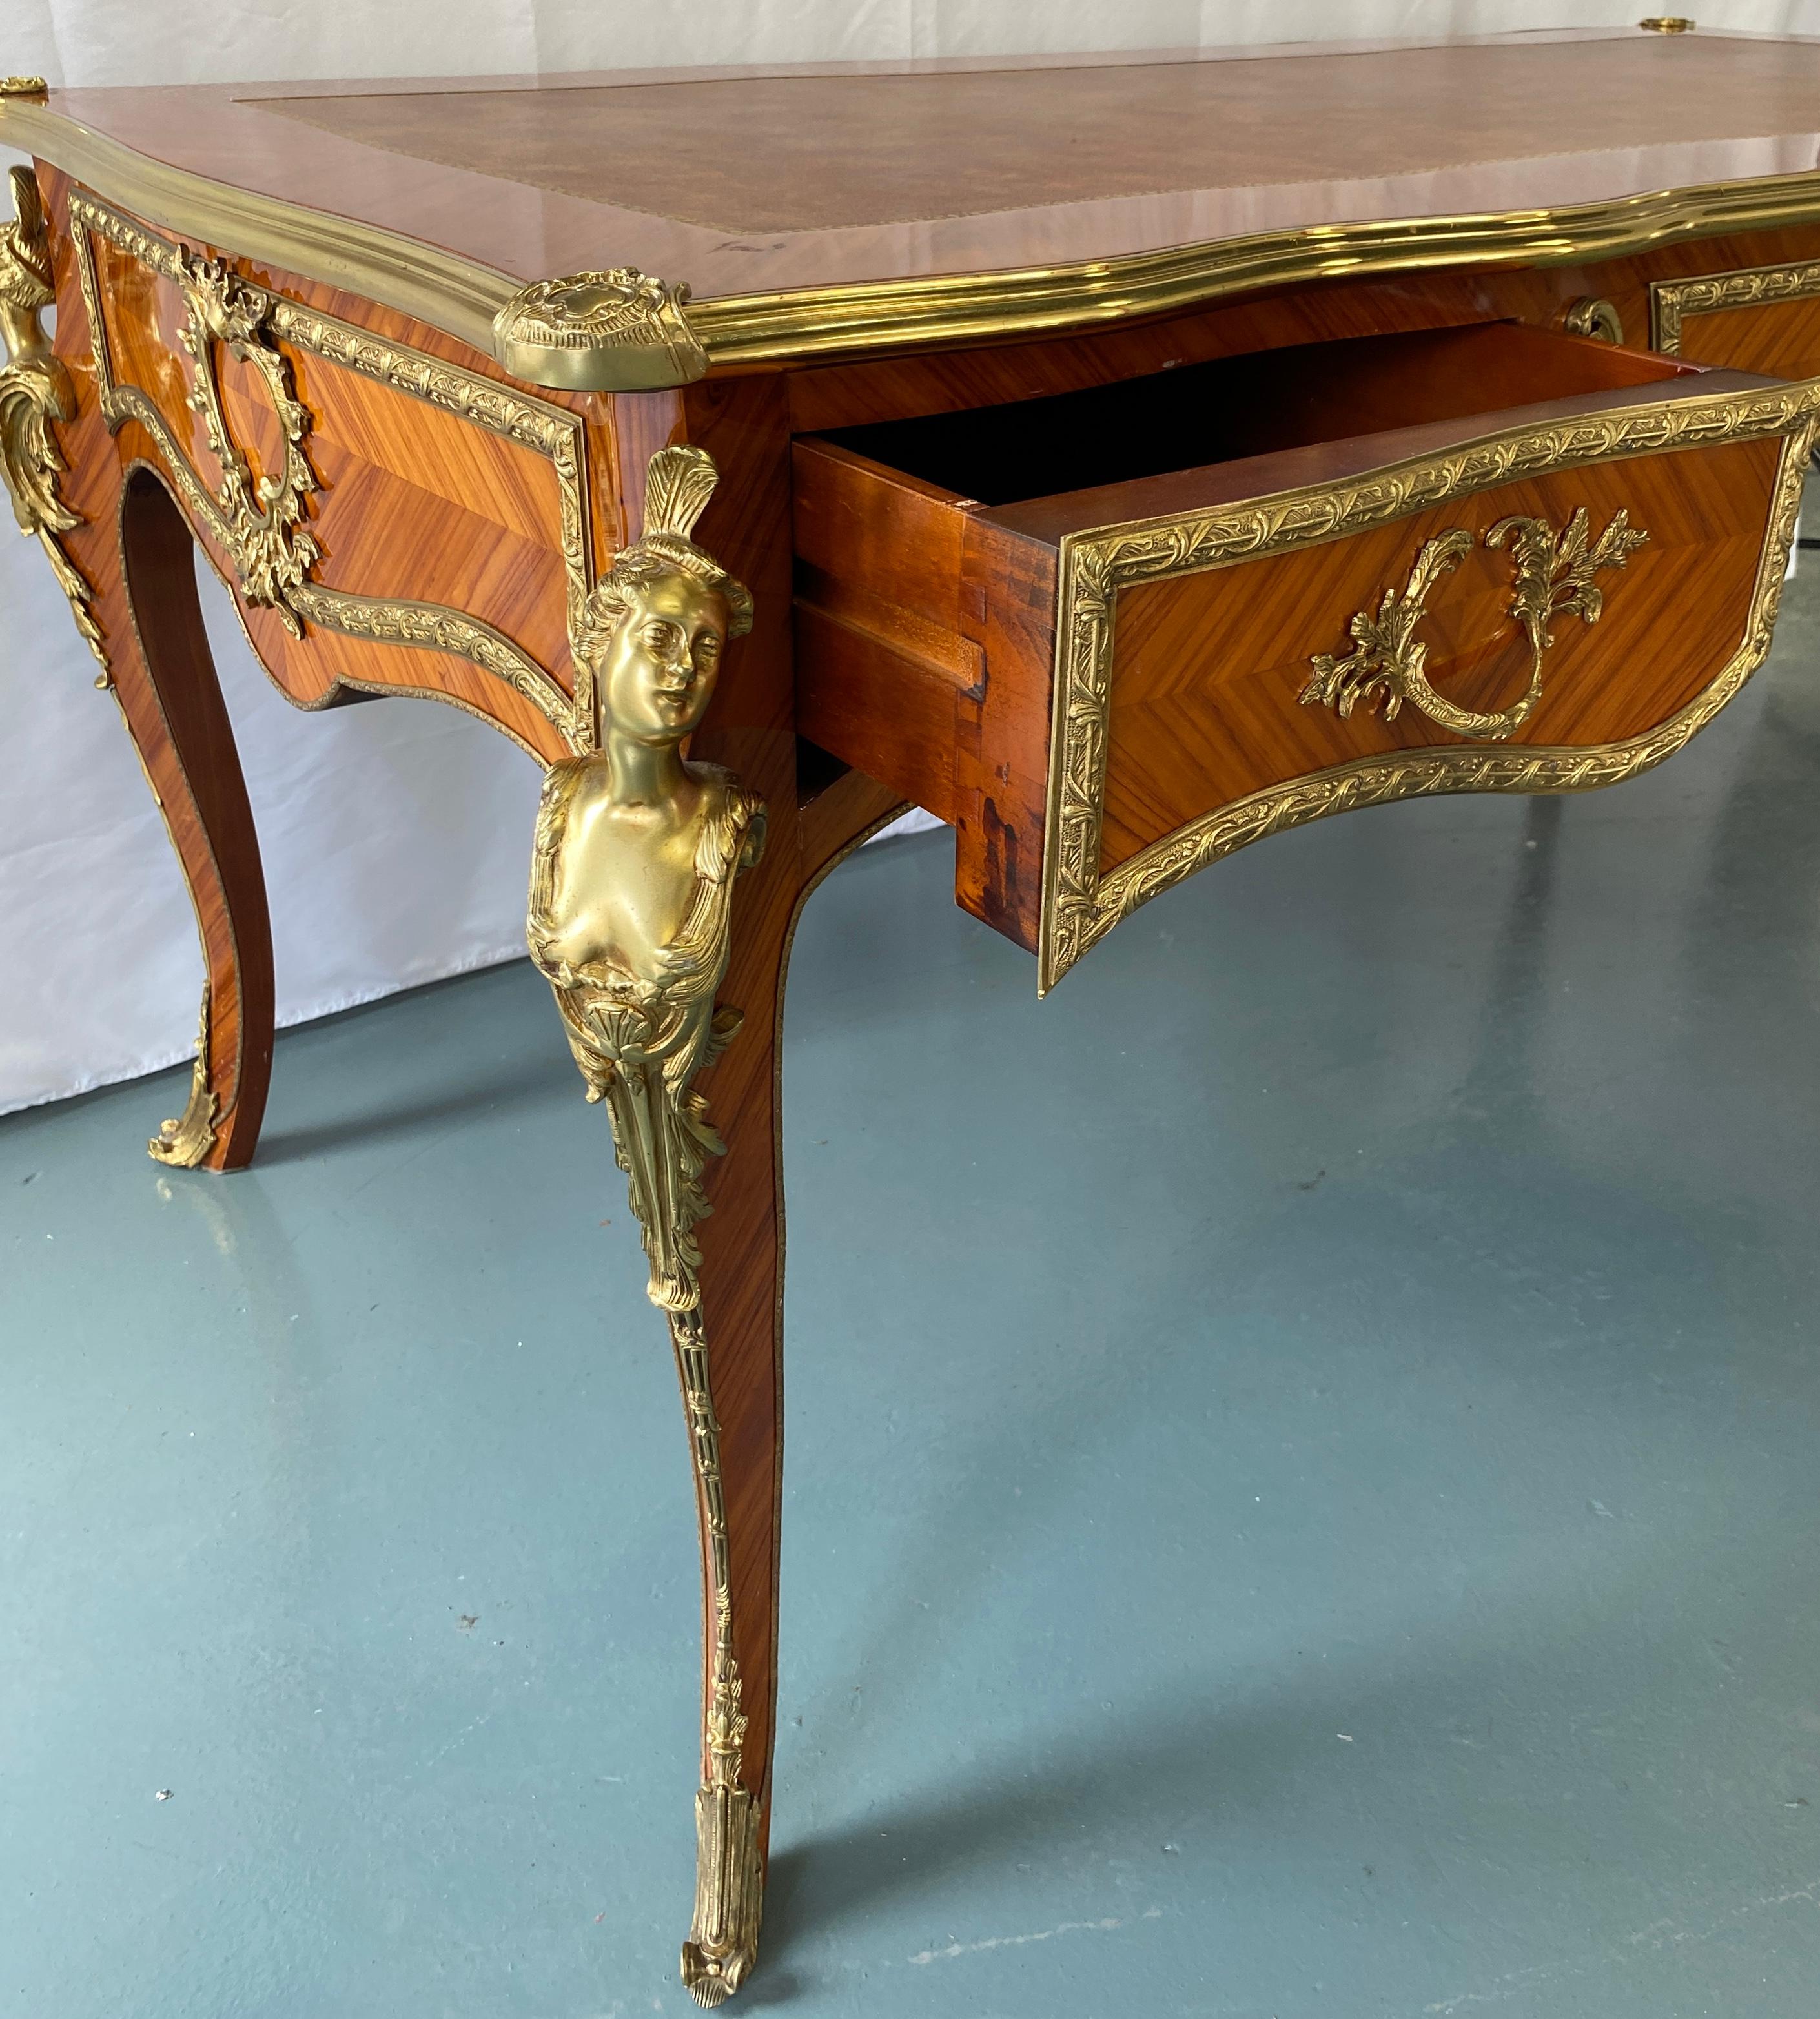 20th Century French Louis XV Style Bureau Plat with Ormolu Mounts French Flat Desk For Sale